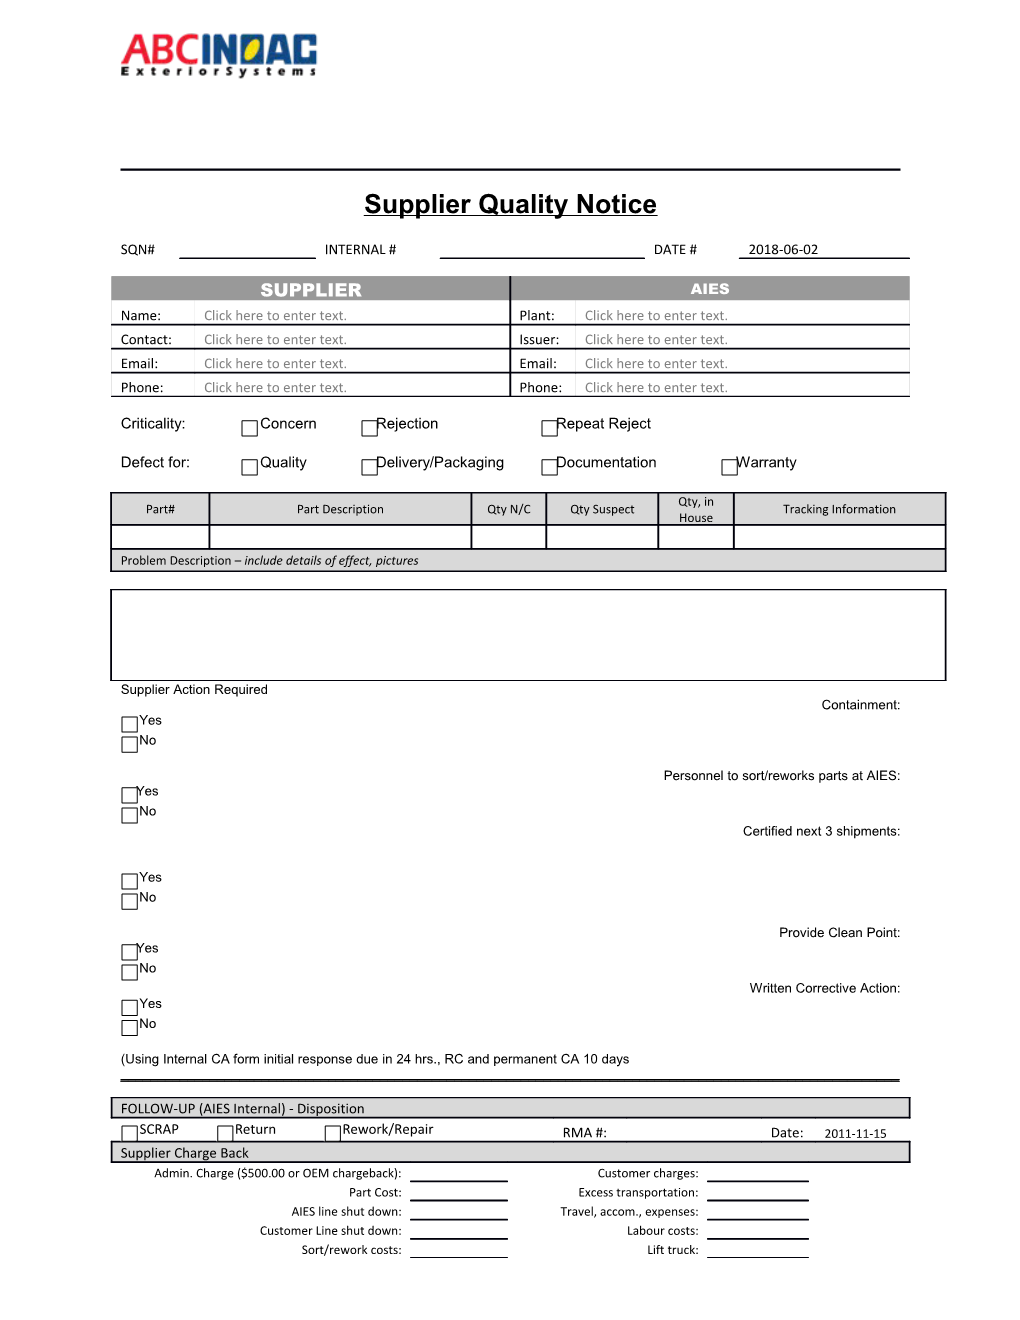 Supplier Quality Notice